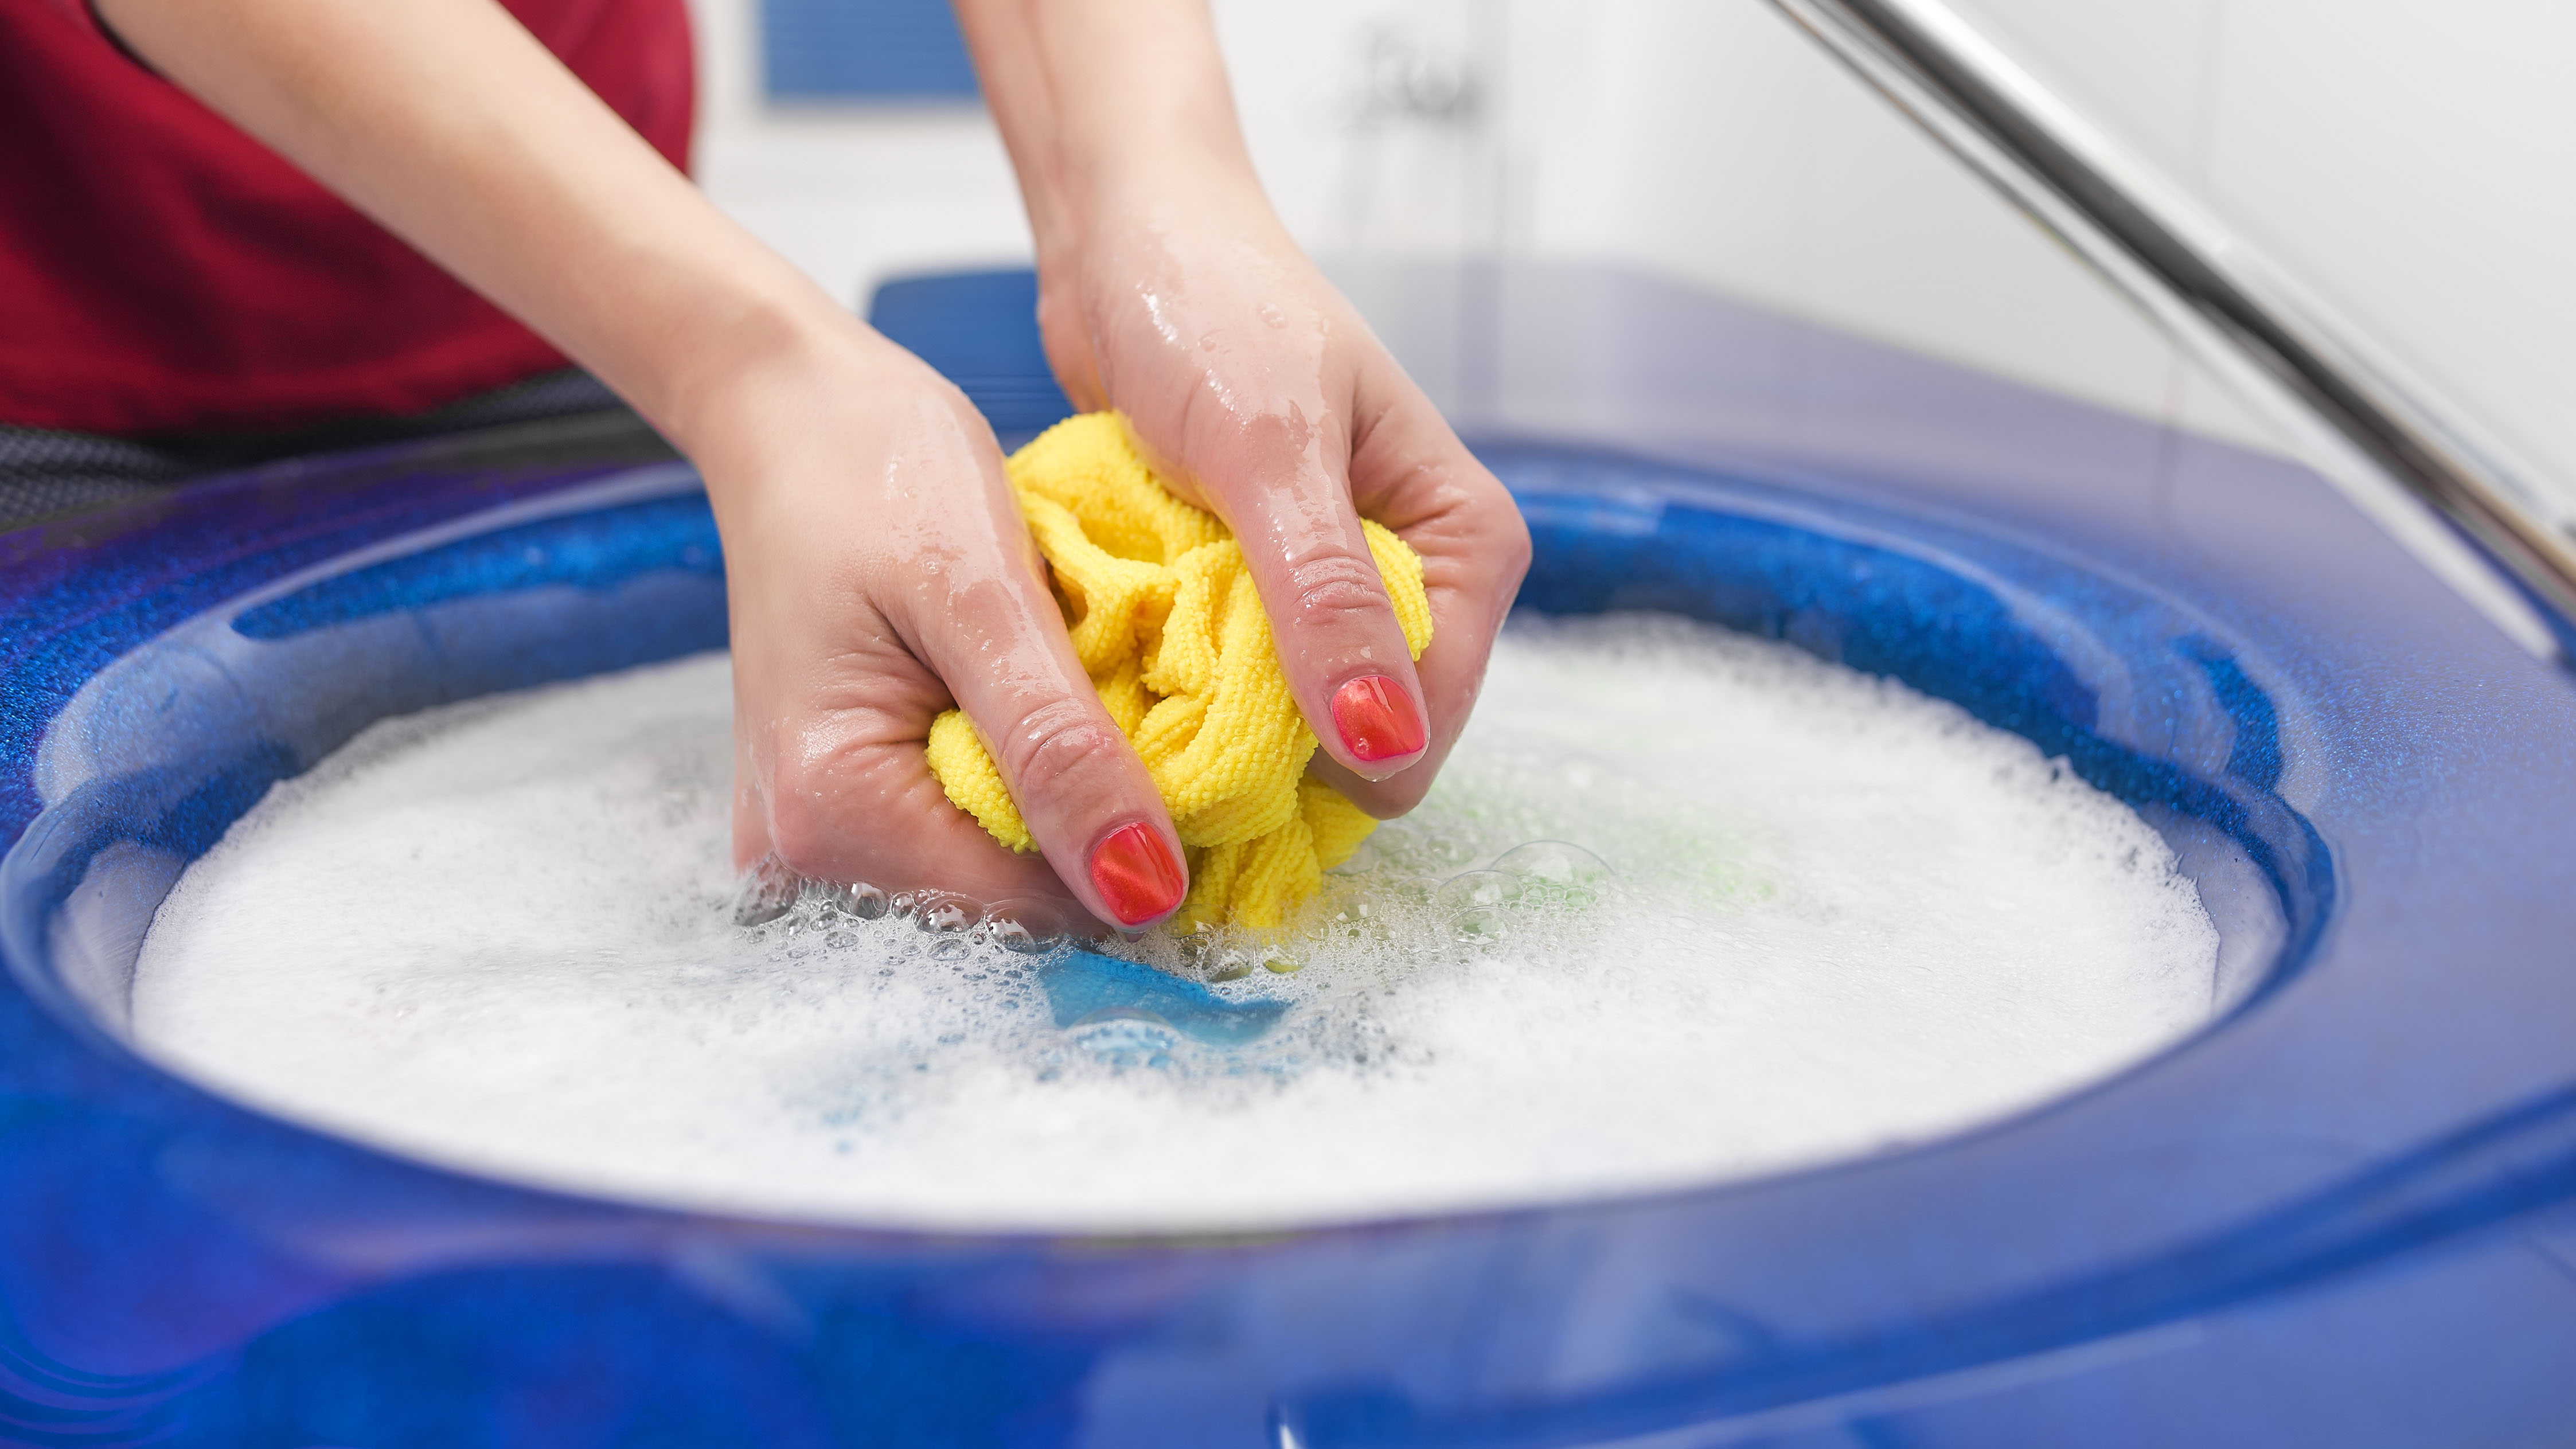 Items being hand washed in soapy water